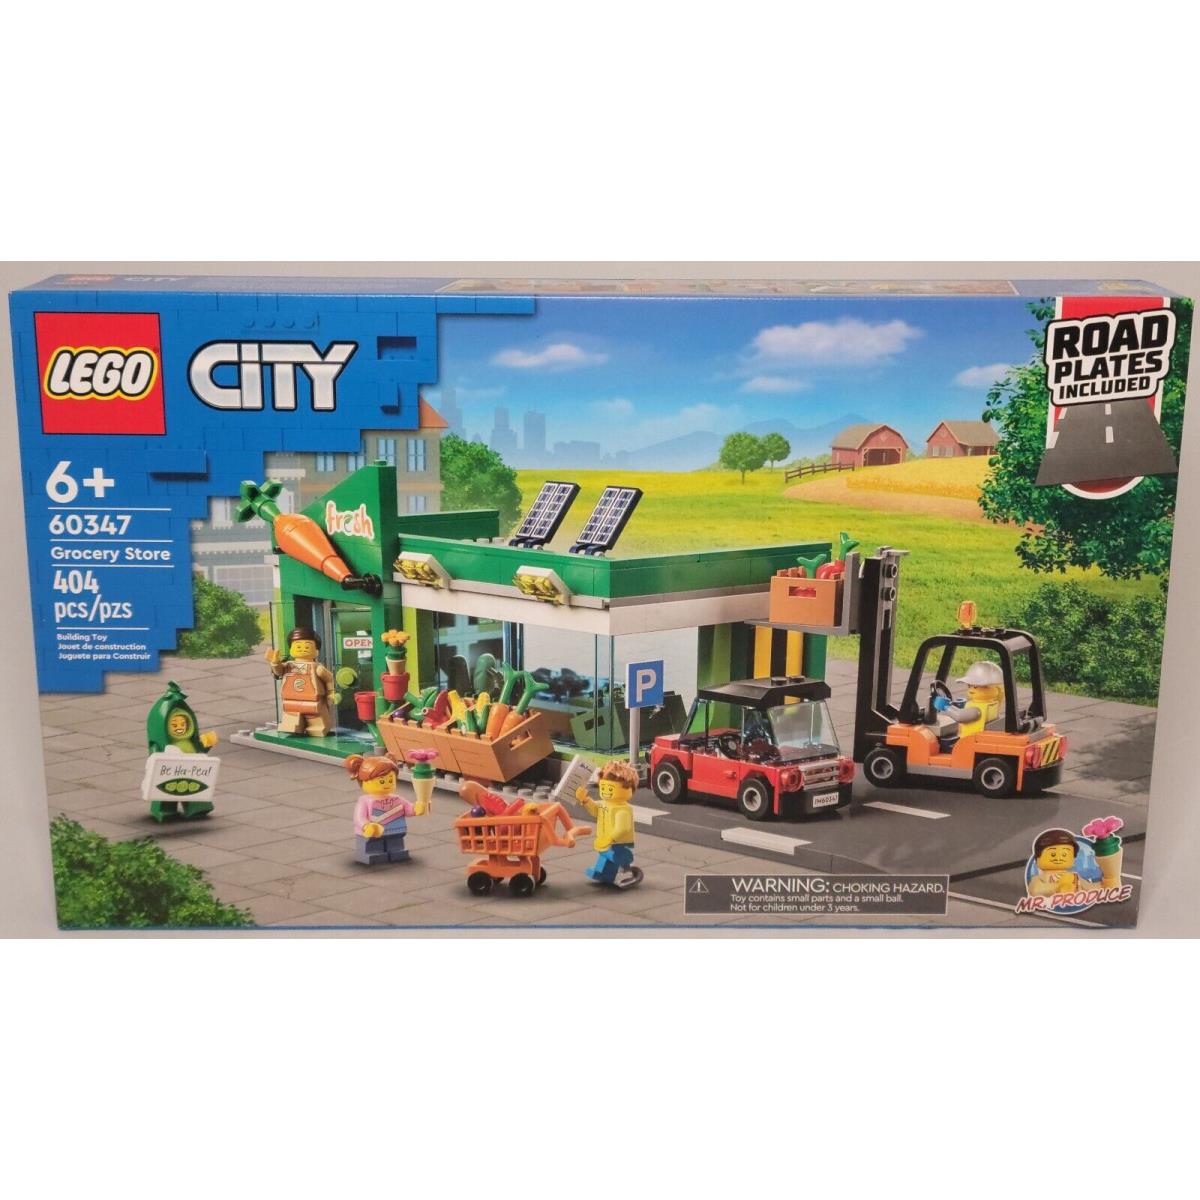 Lego 60347 Grocery Store City Adventures Series Mr Produce Peapod Costumed Girl